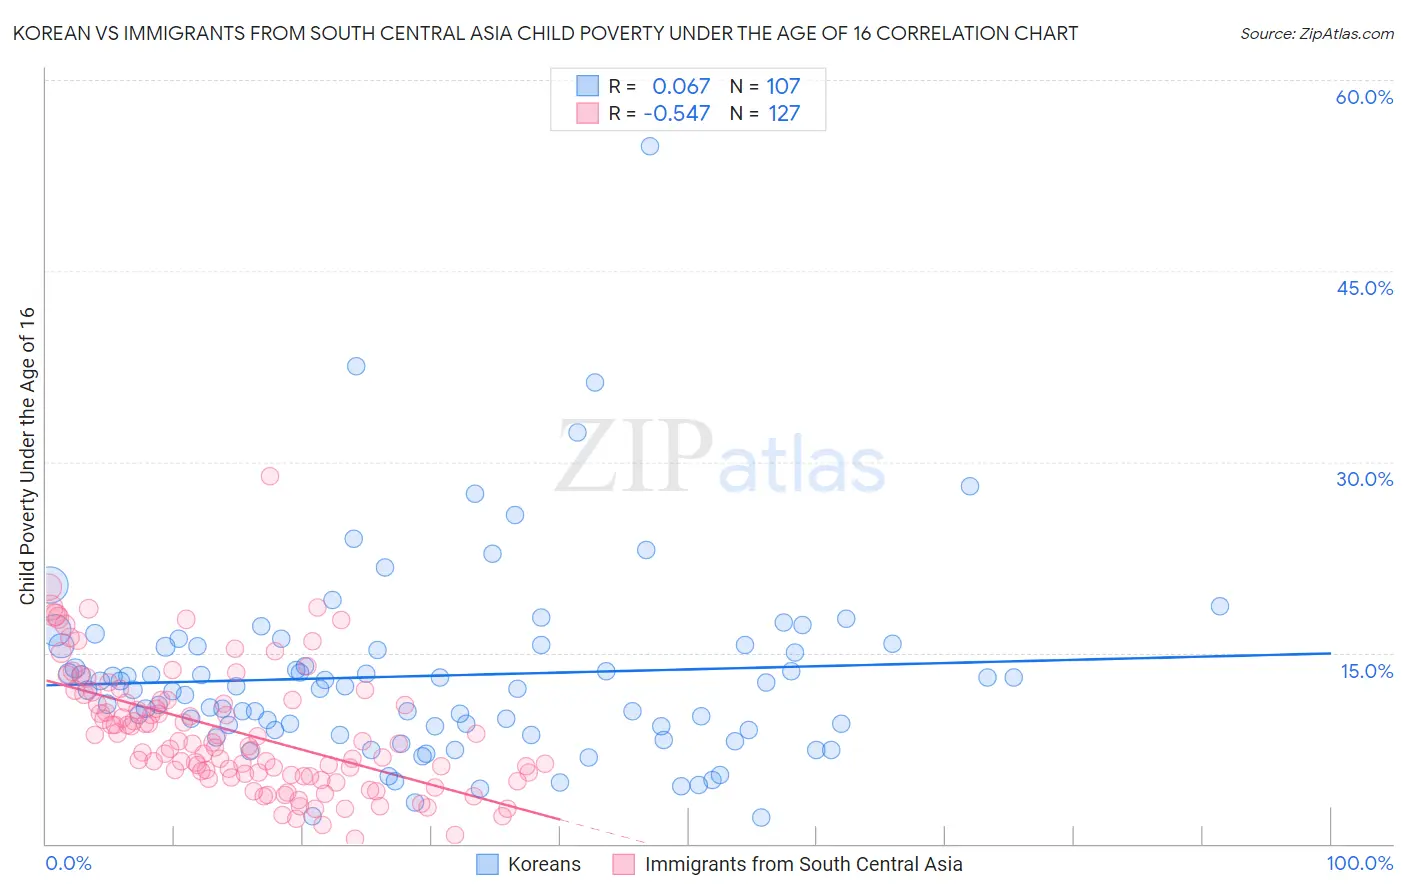 Korean vs Immigrants from South Central Asia Child Poverty Under the Age of 16